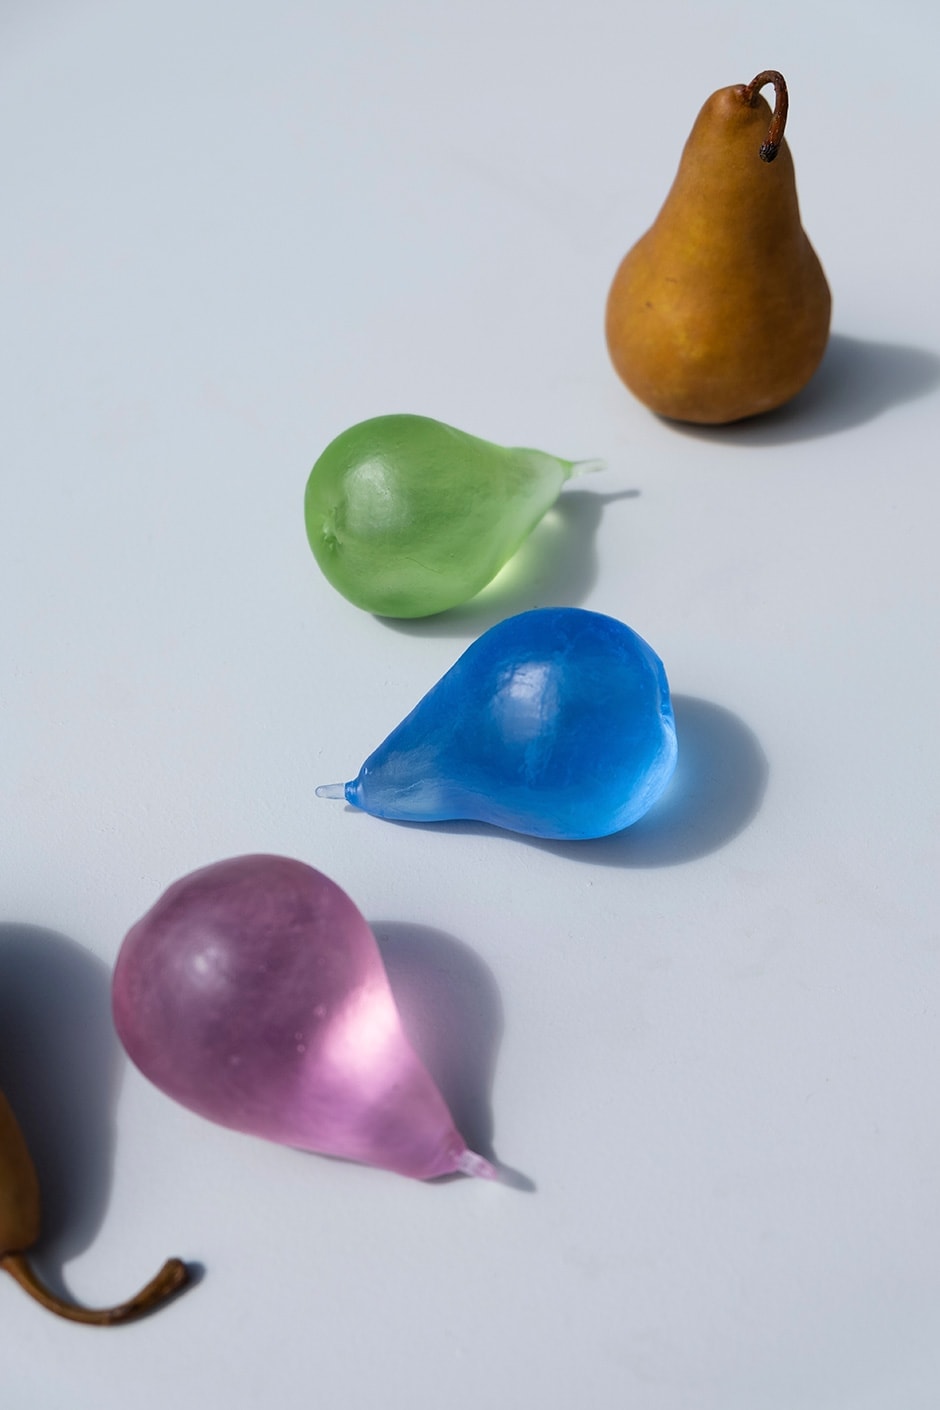 The Devon Made glass fruit series had us at ‘banana’